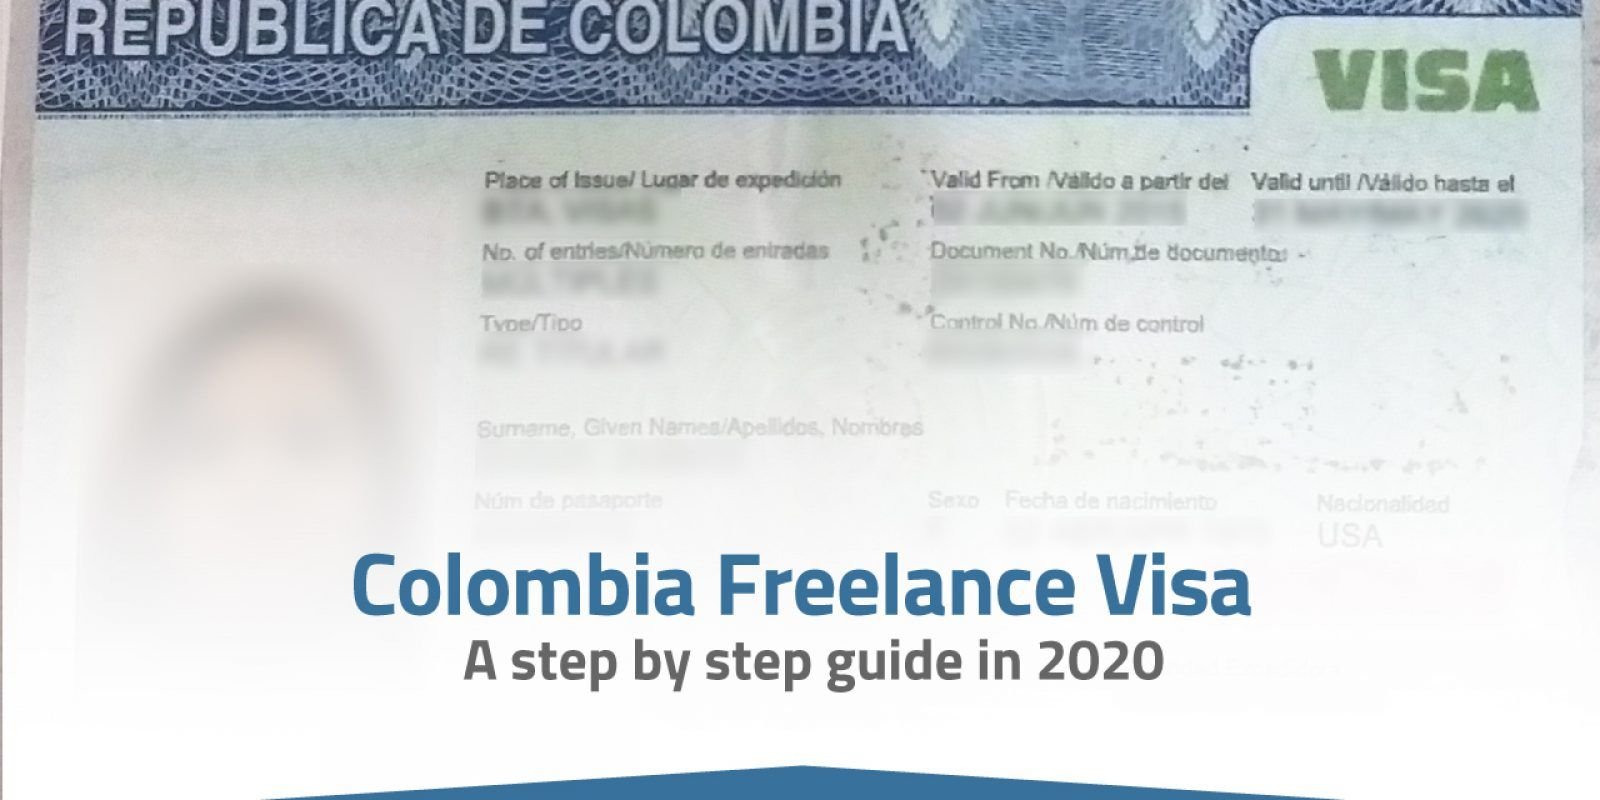 Colombia Freelance Visa A Step By Step Guide in 2020